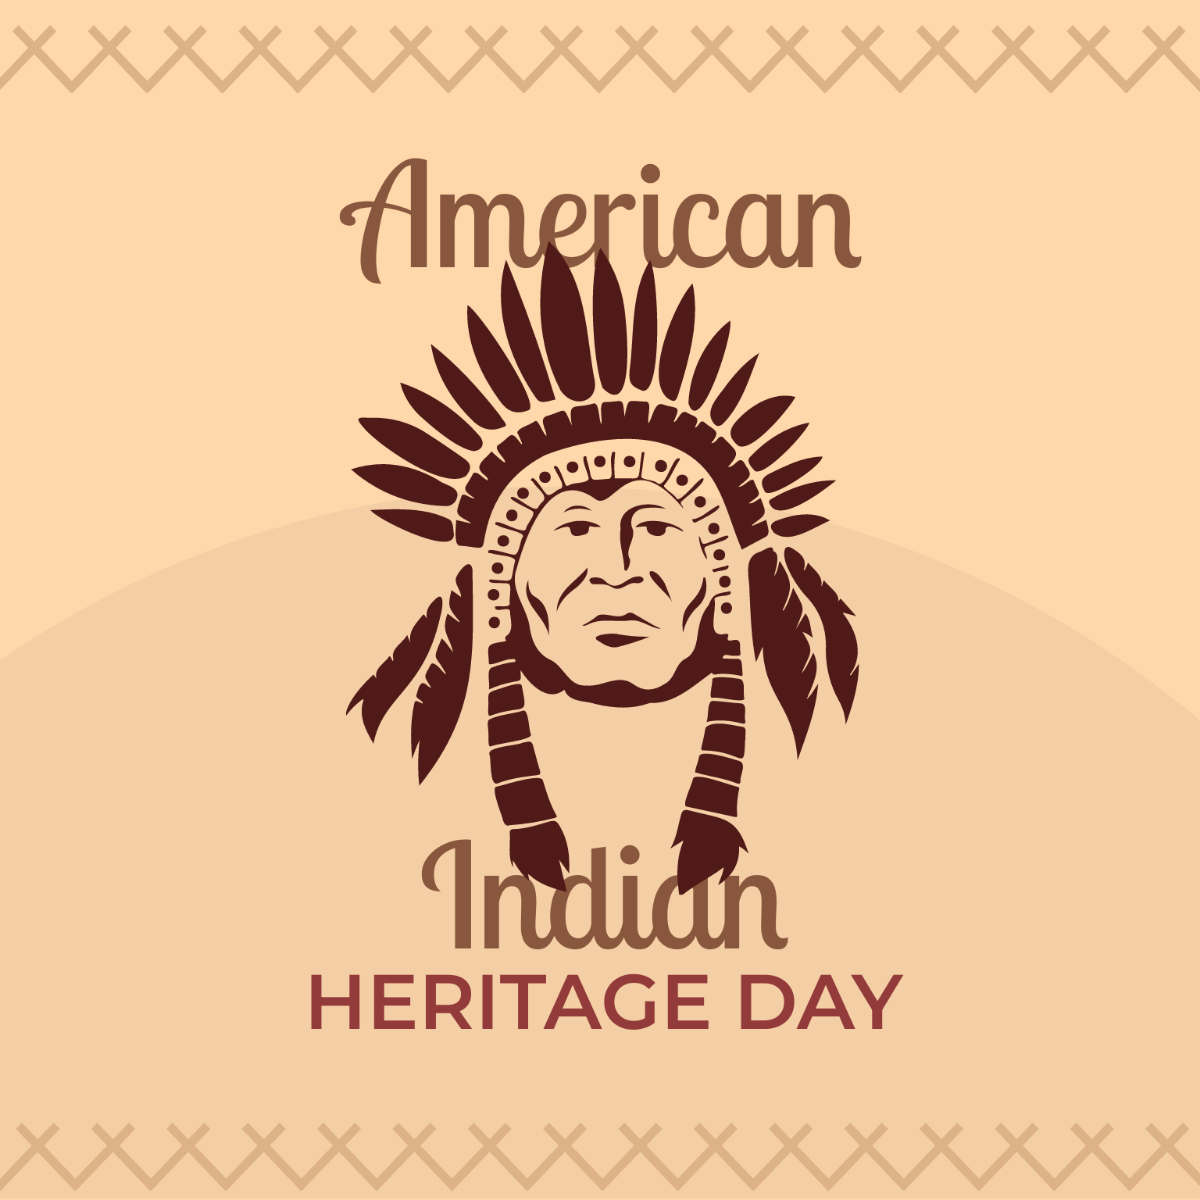 American Indian Heritage Day Celebration Vector Template